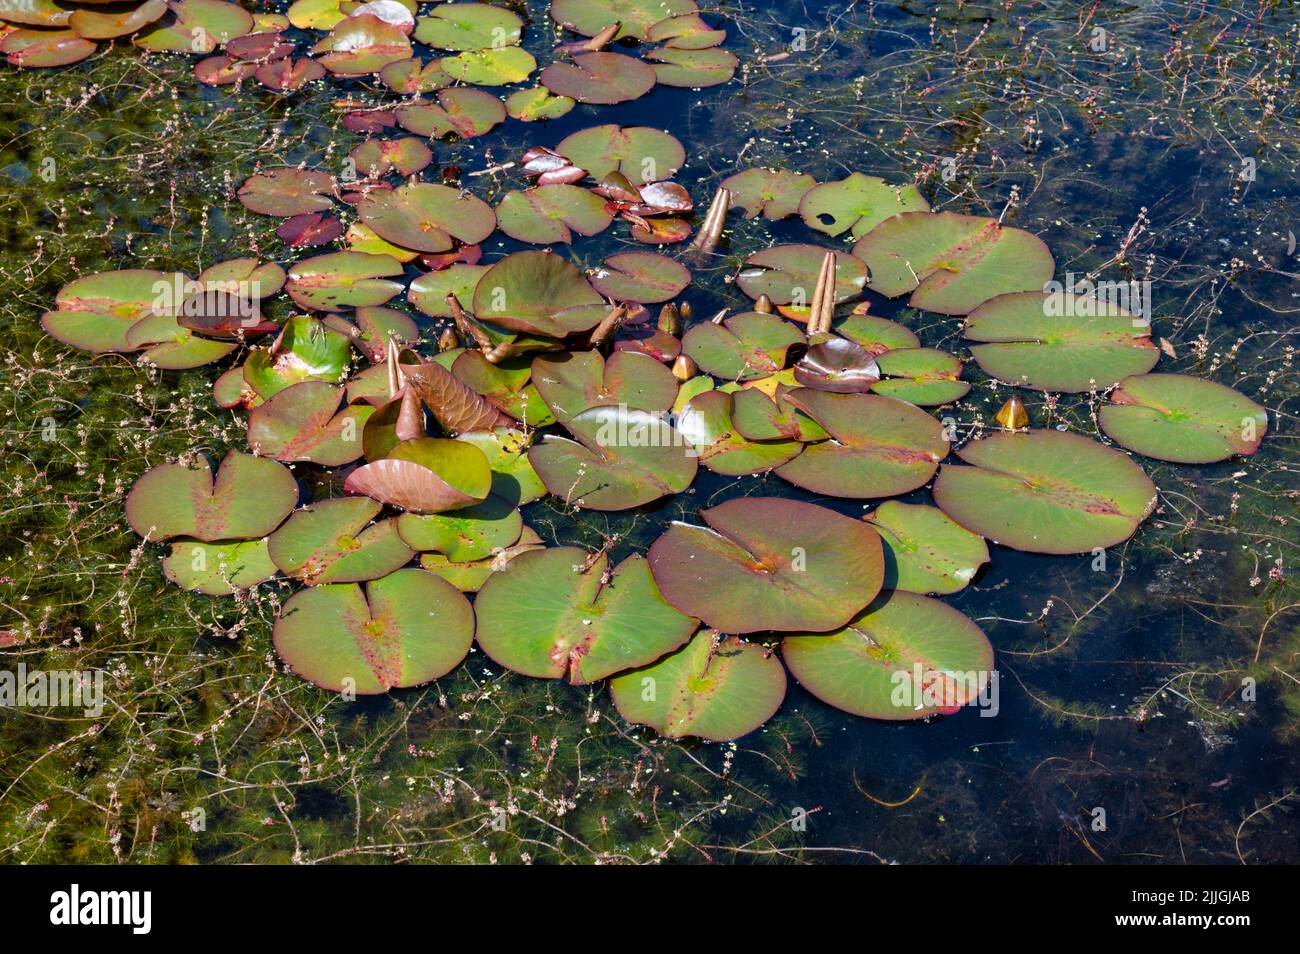 A group of green lily pads floting on a pond in Ireland in the Summer Stock Photo